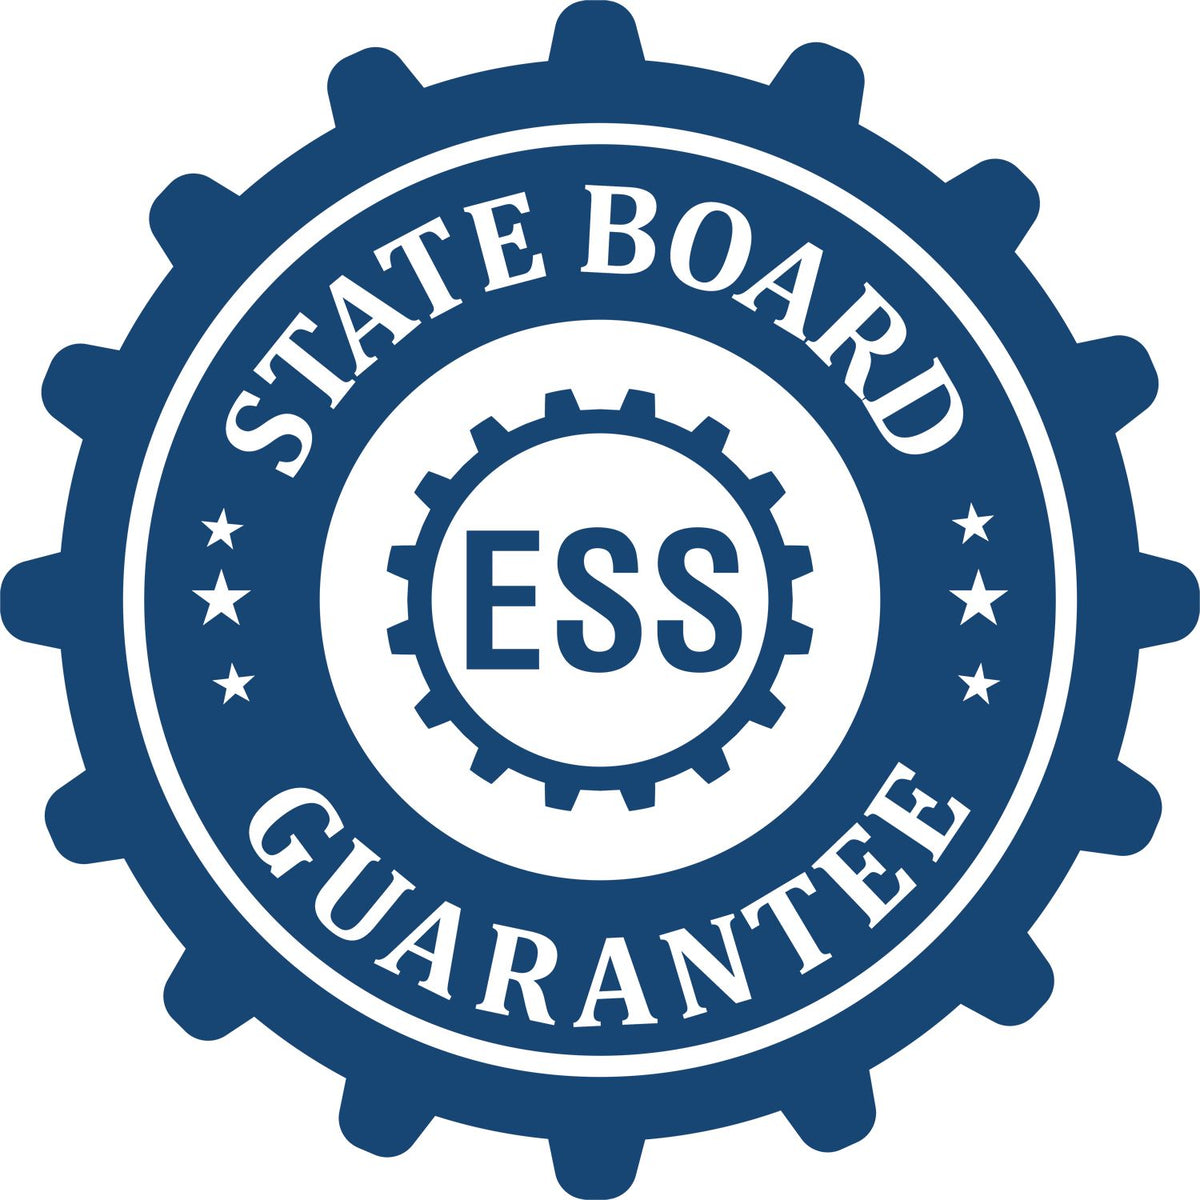 An emblem in a gear shape illustrating a state board guarantee for the Virginia Engineer Desk Seal product.